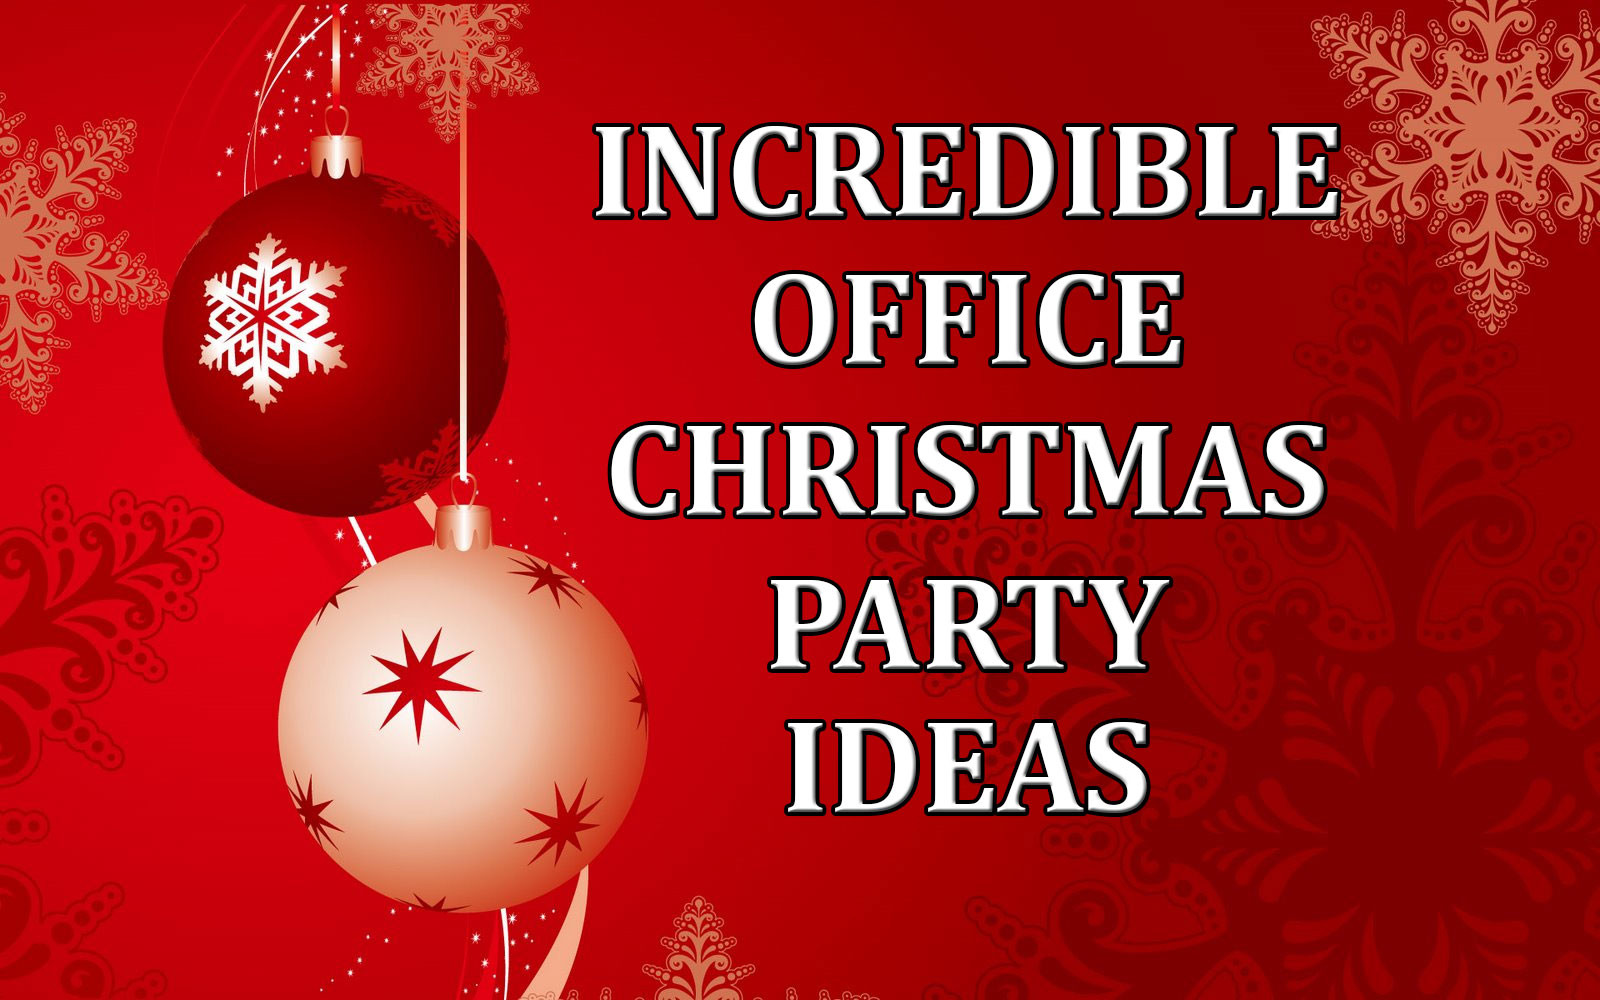 Fun Office Holiday Party Ideas
 Incredible fice Christmas Party Ideas edy Ventriloquist